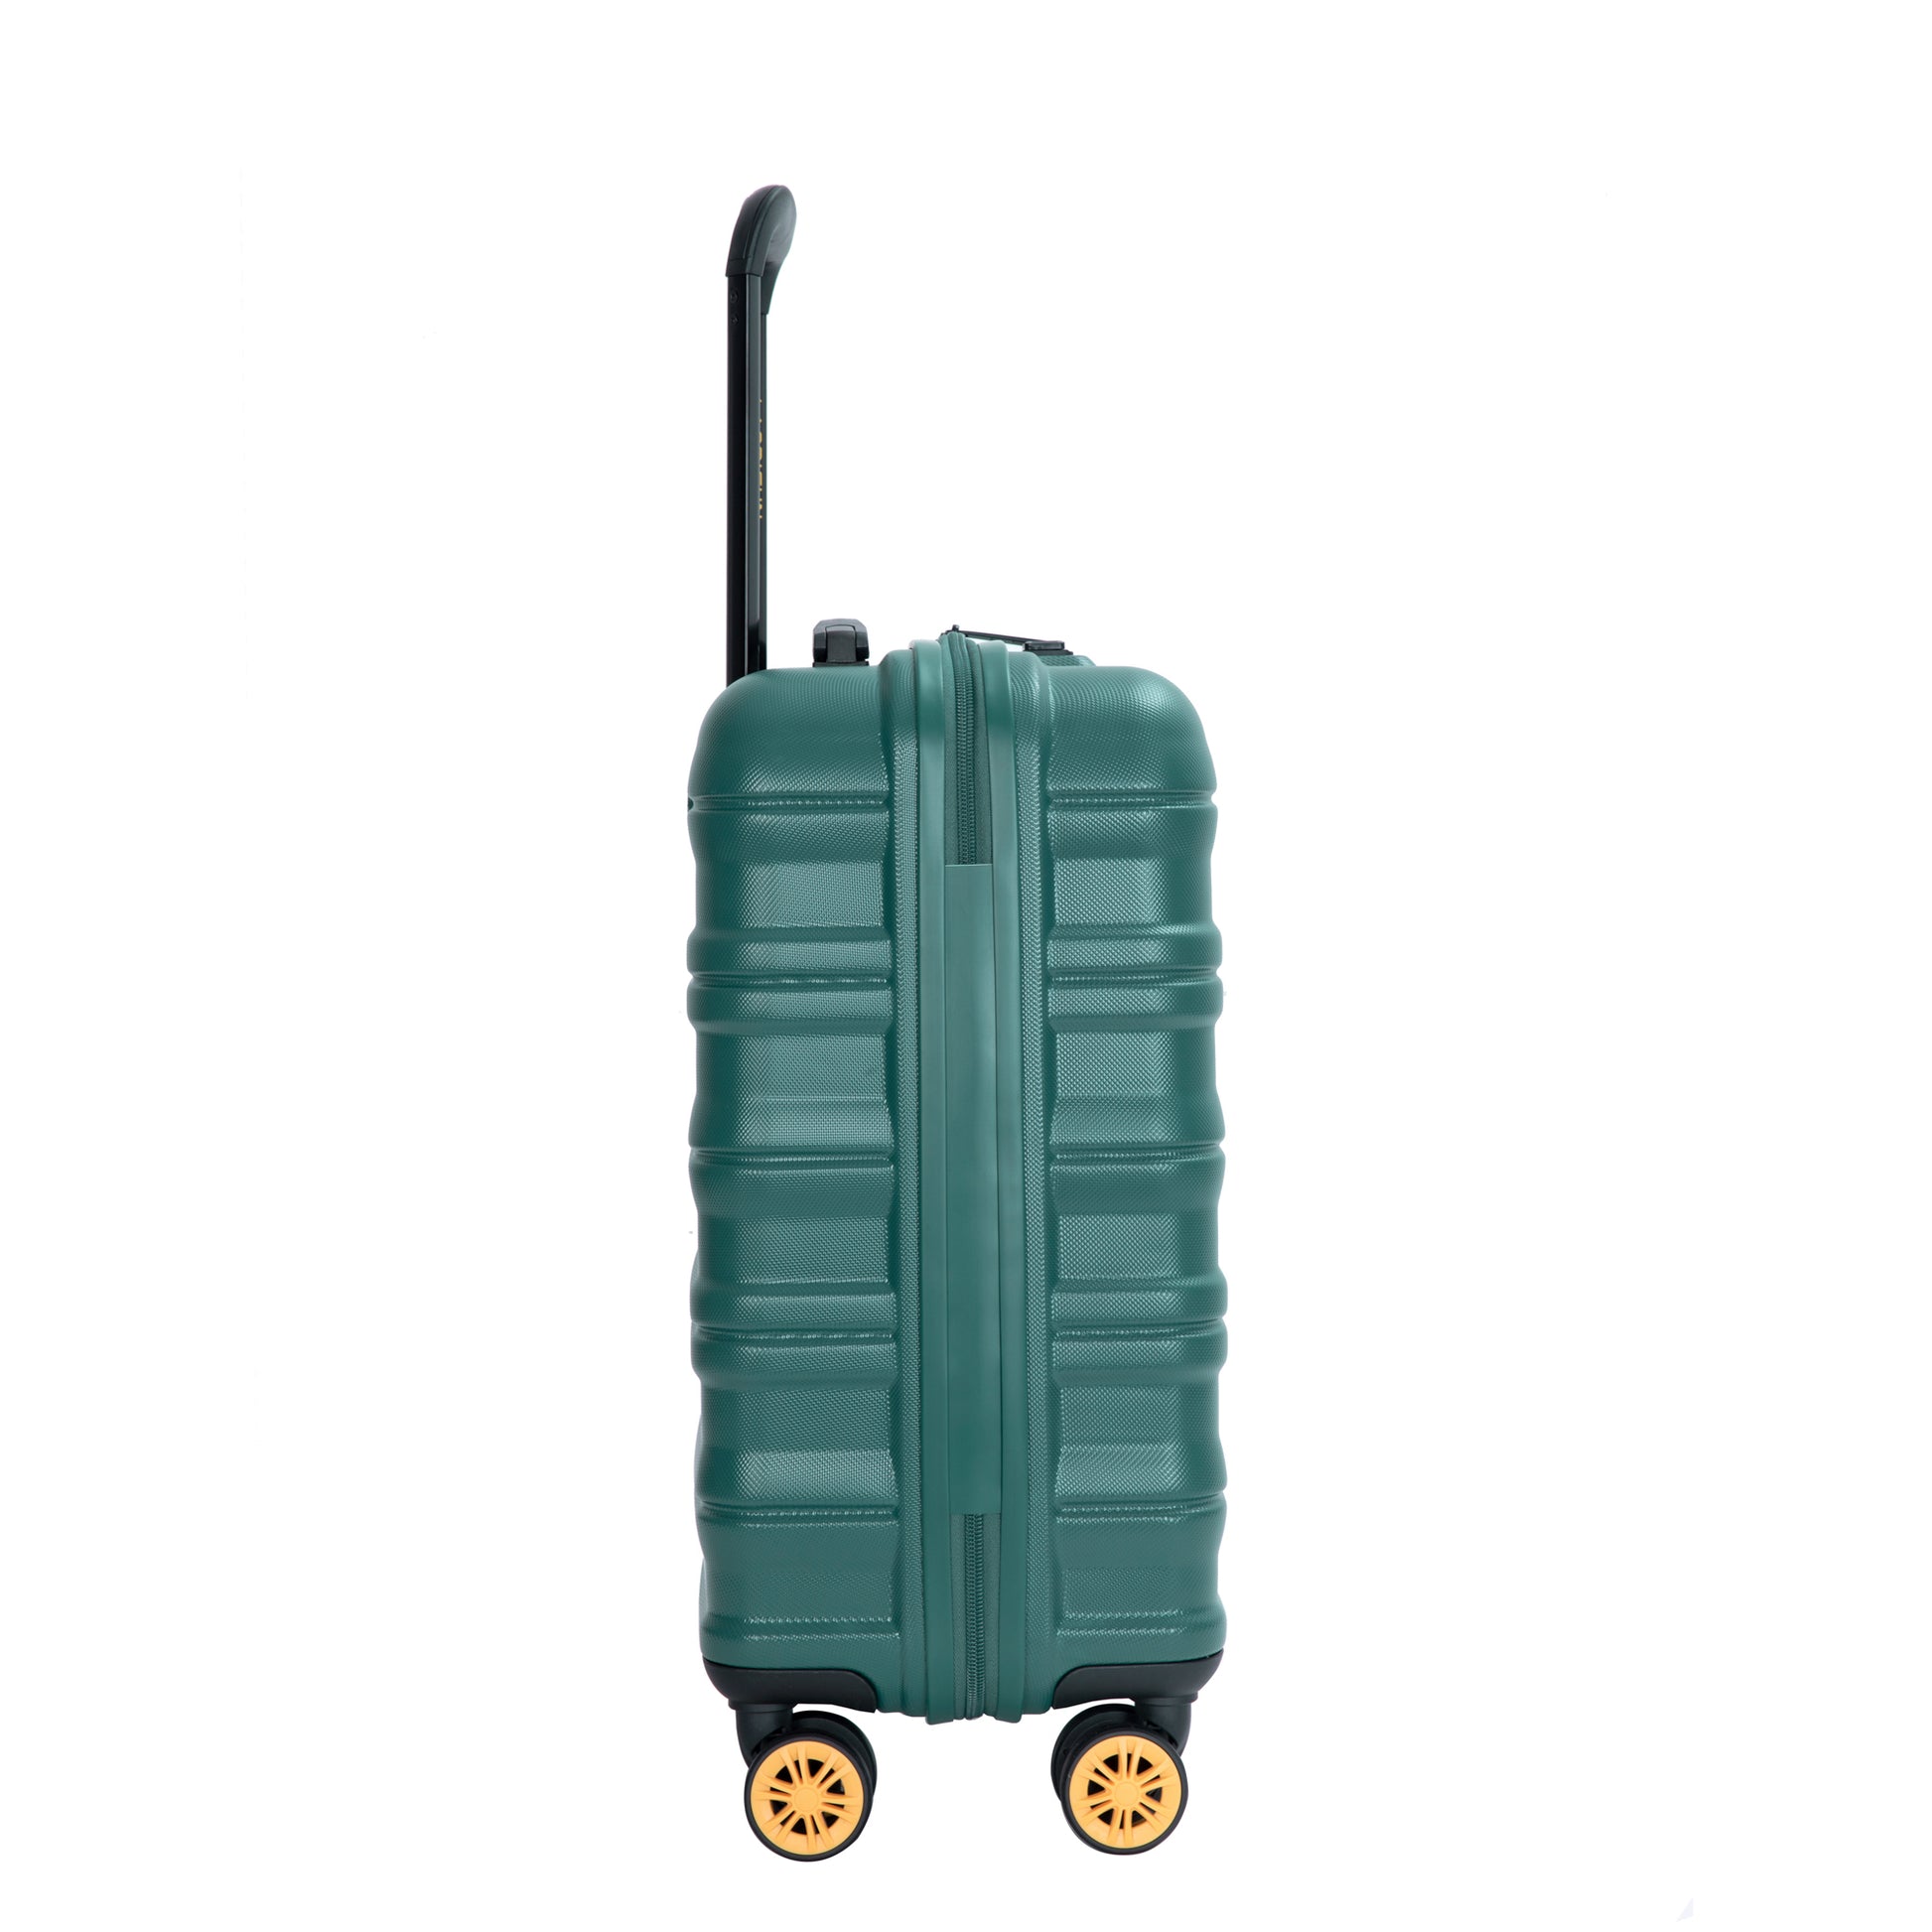 Carry On Luggage Airline Approved18.5" Carry On dark green-abs+pc